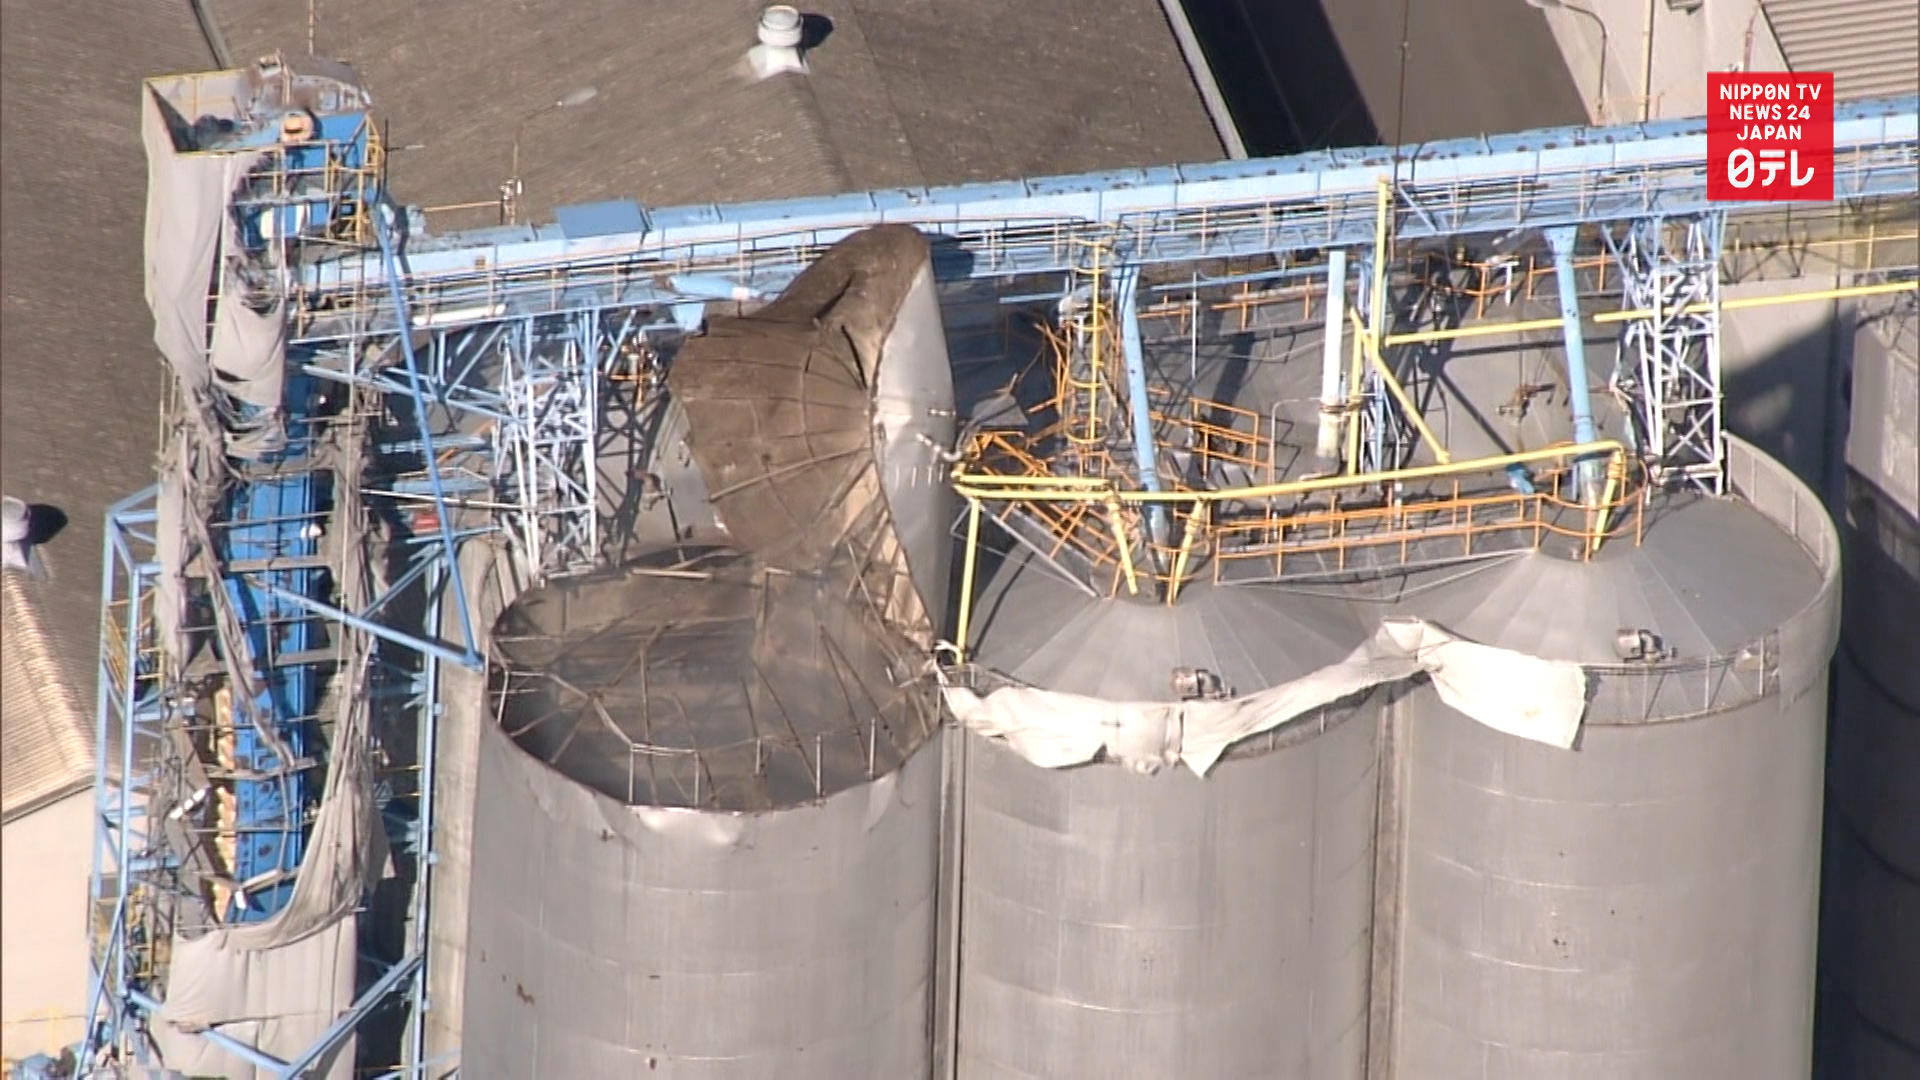 Explosion occurs at livestock feed plant